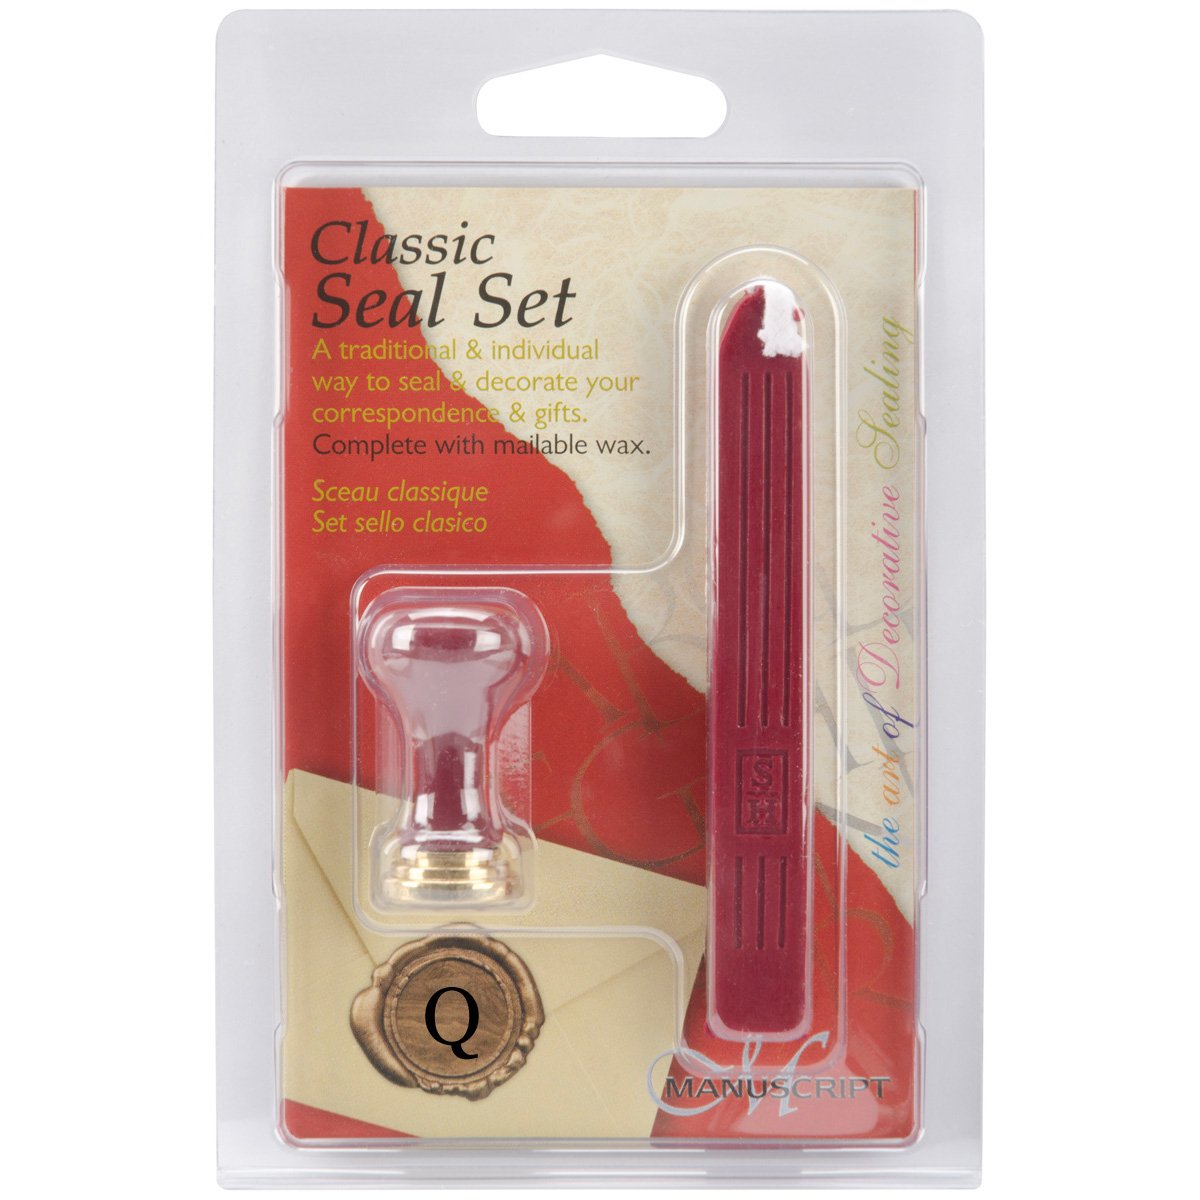 Msh725-q Classic Initial Sealing Set With Red Wax - Q